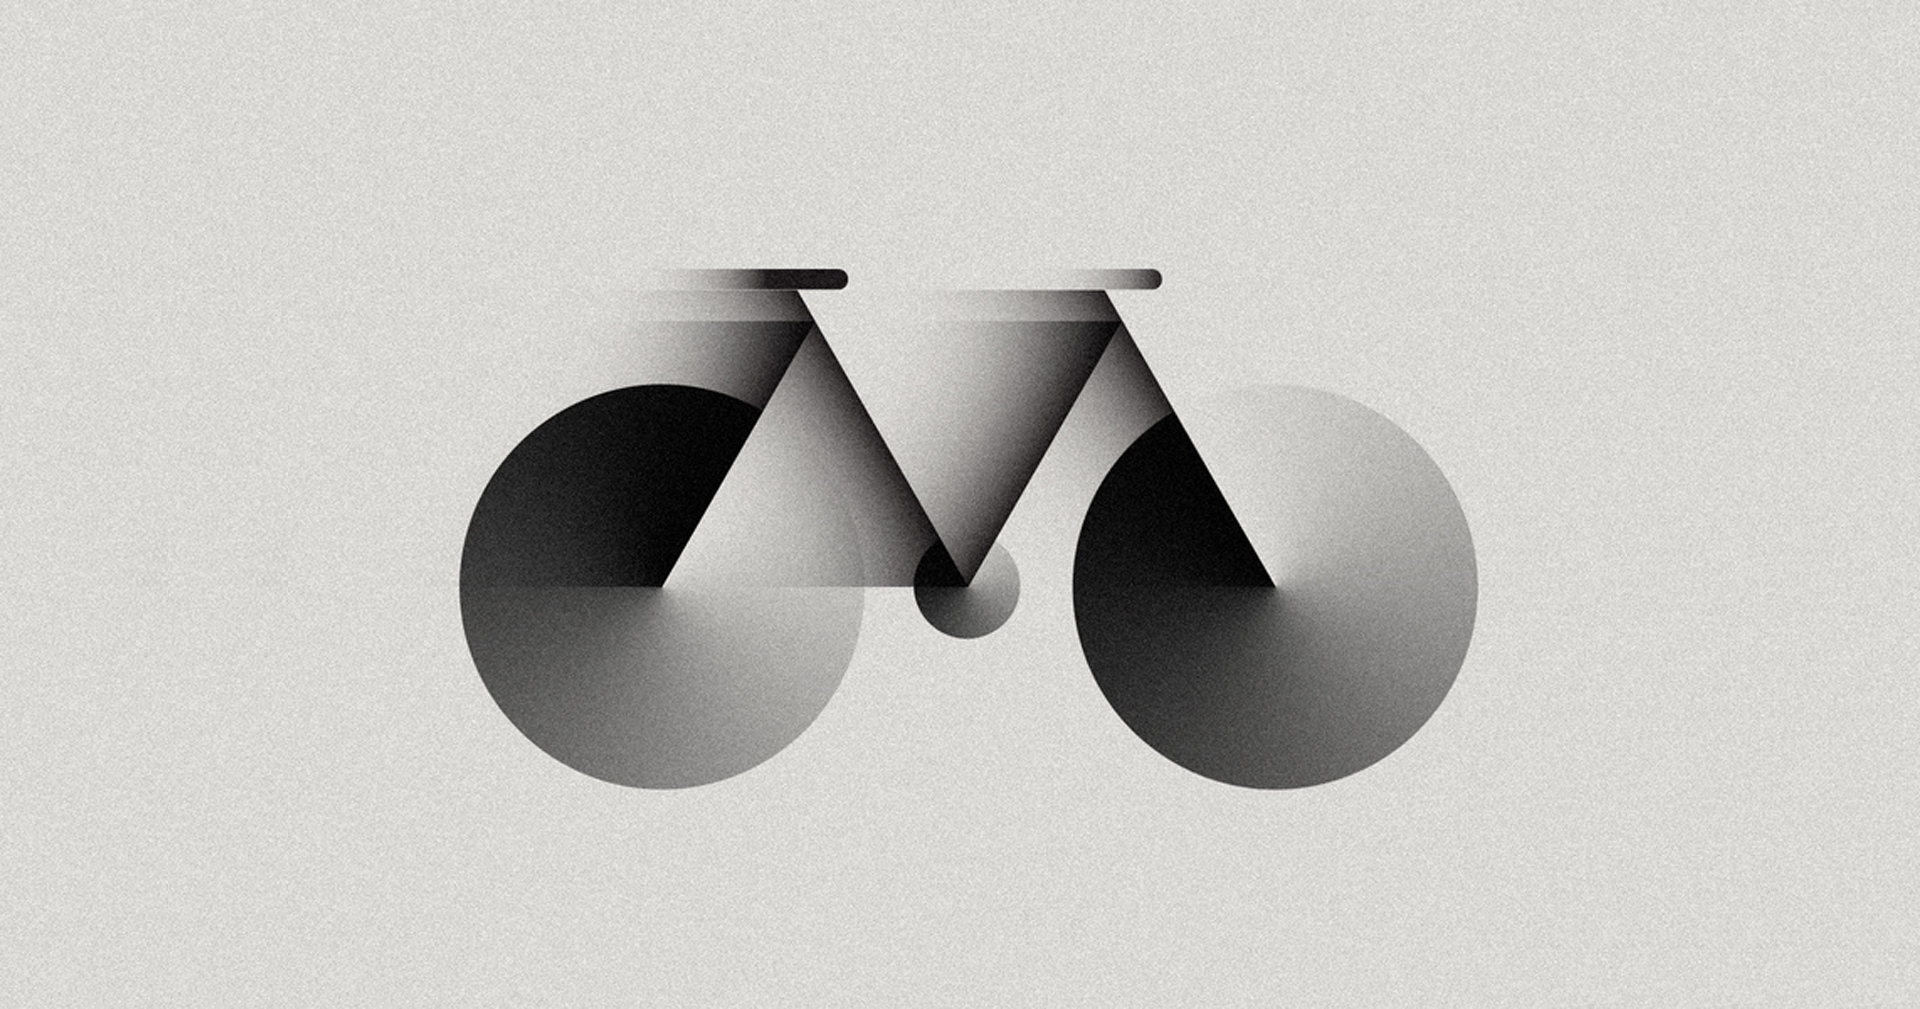 M is for Motion by Andrew Pons